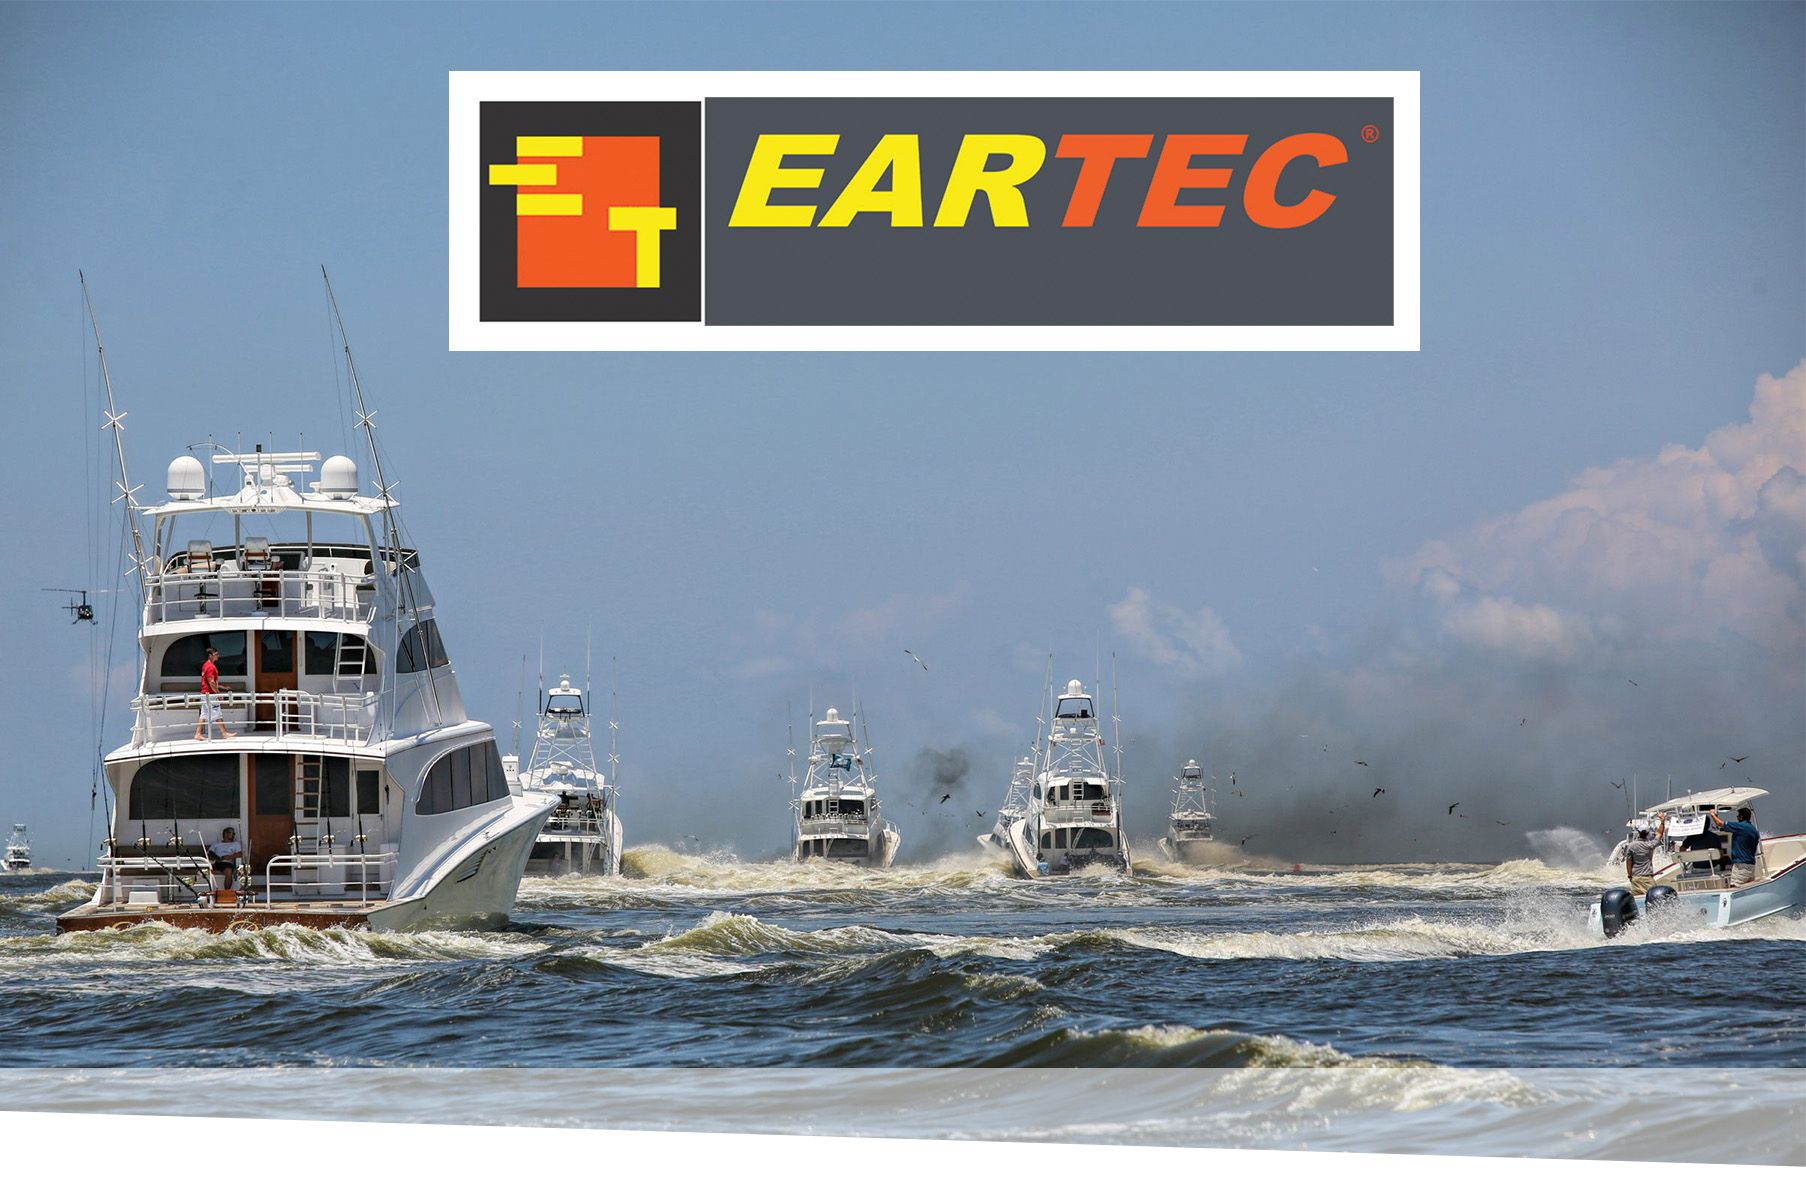 Eartec Marine Boating Headsets - Wireless, Hands-free, Rugged, High-quality